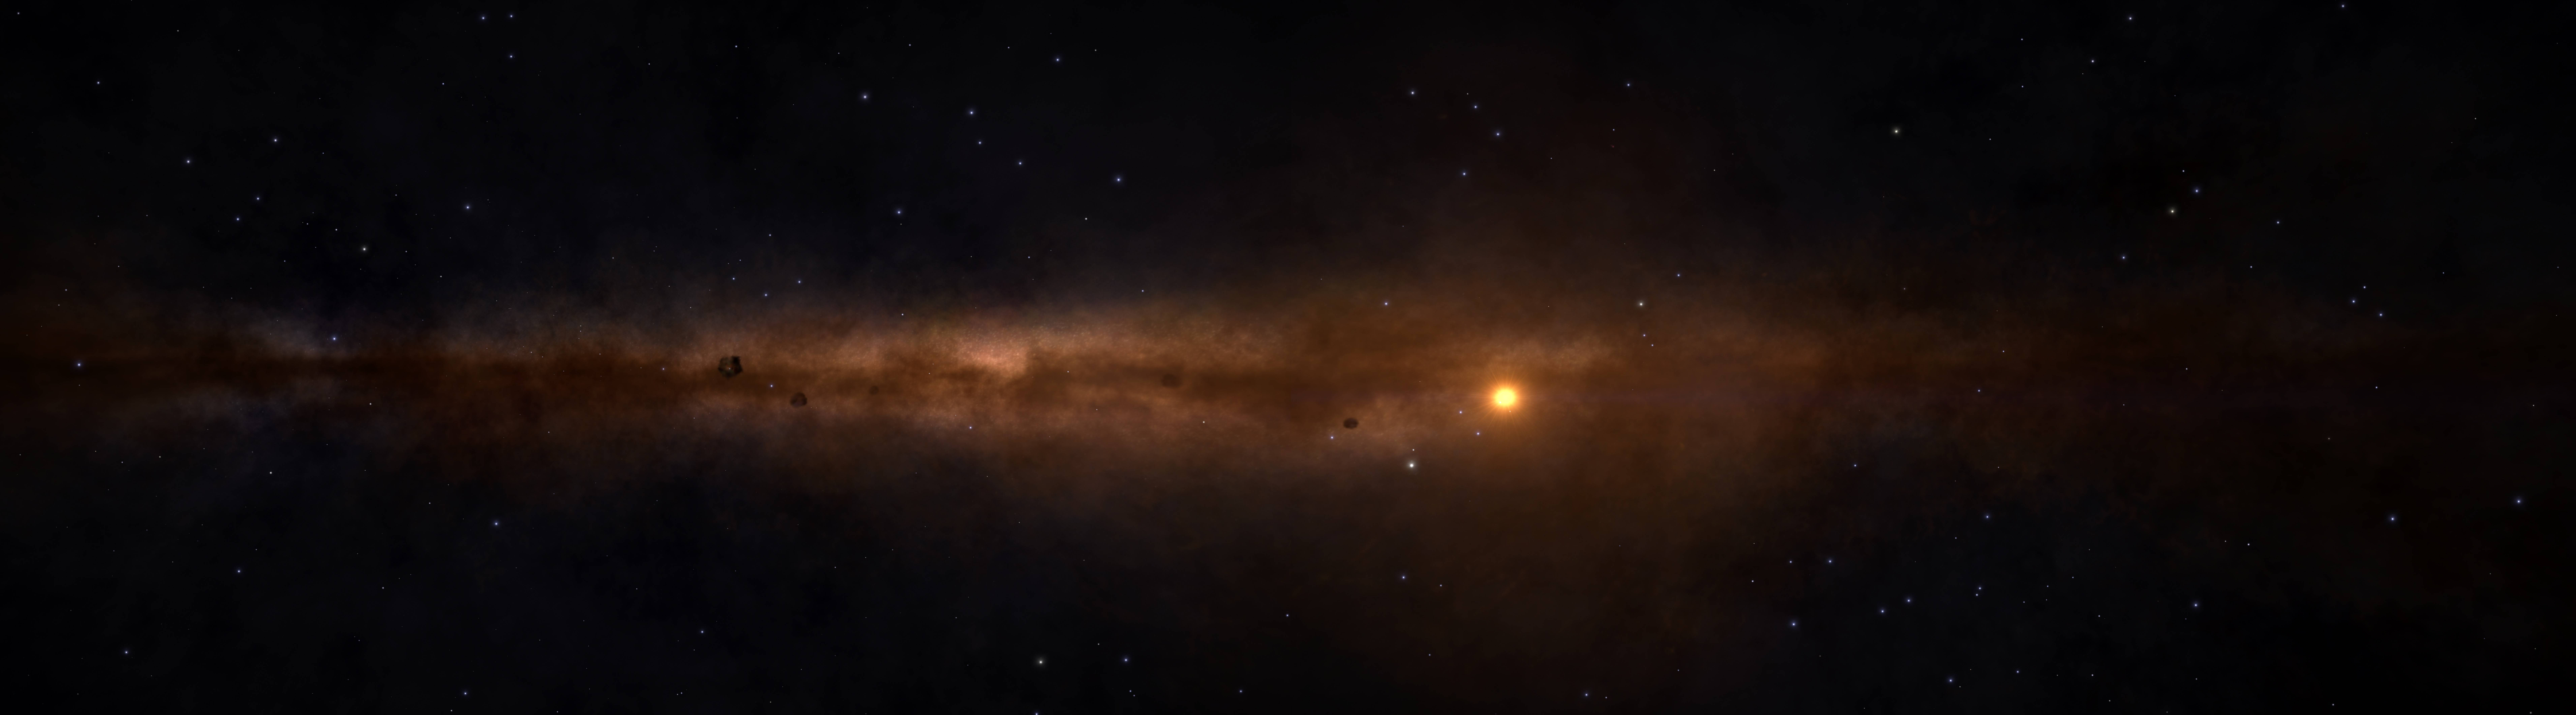 Spent too much time in Elite:Dangerous. [15285x4244]